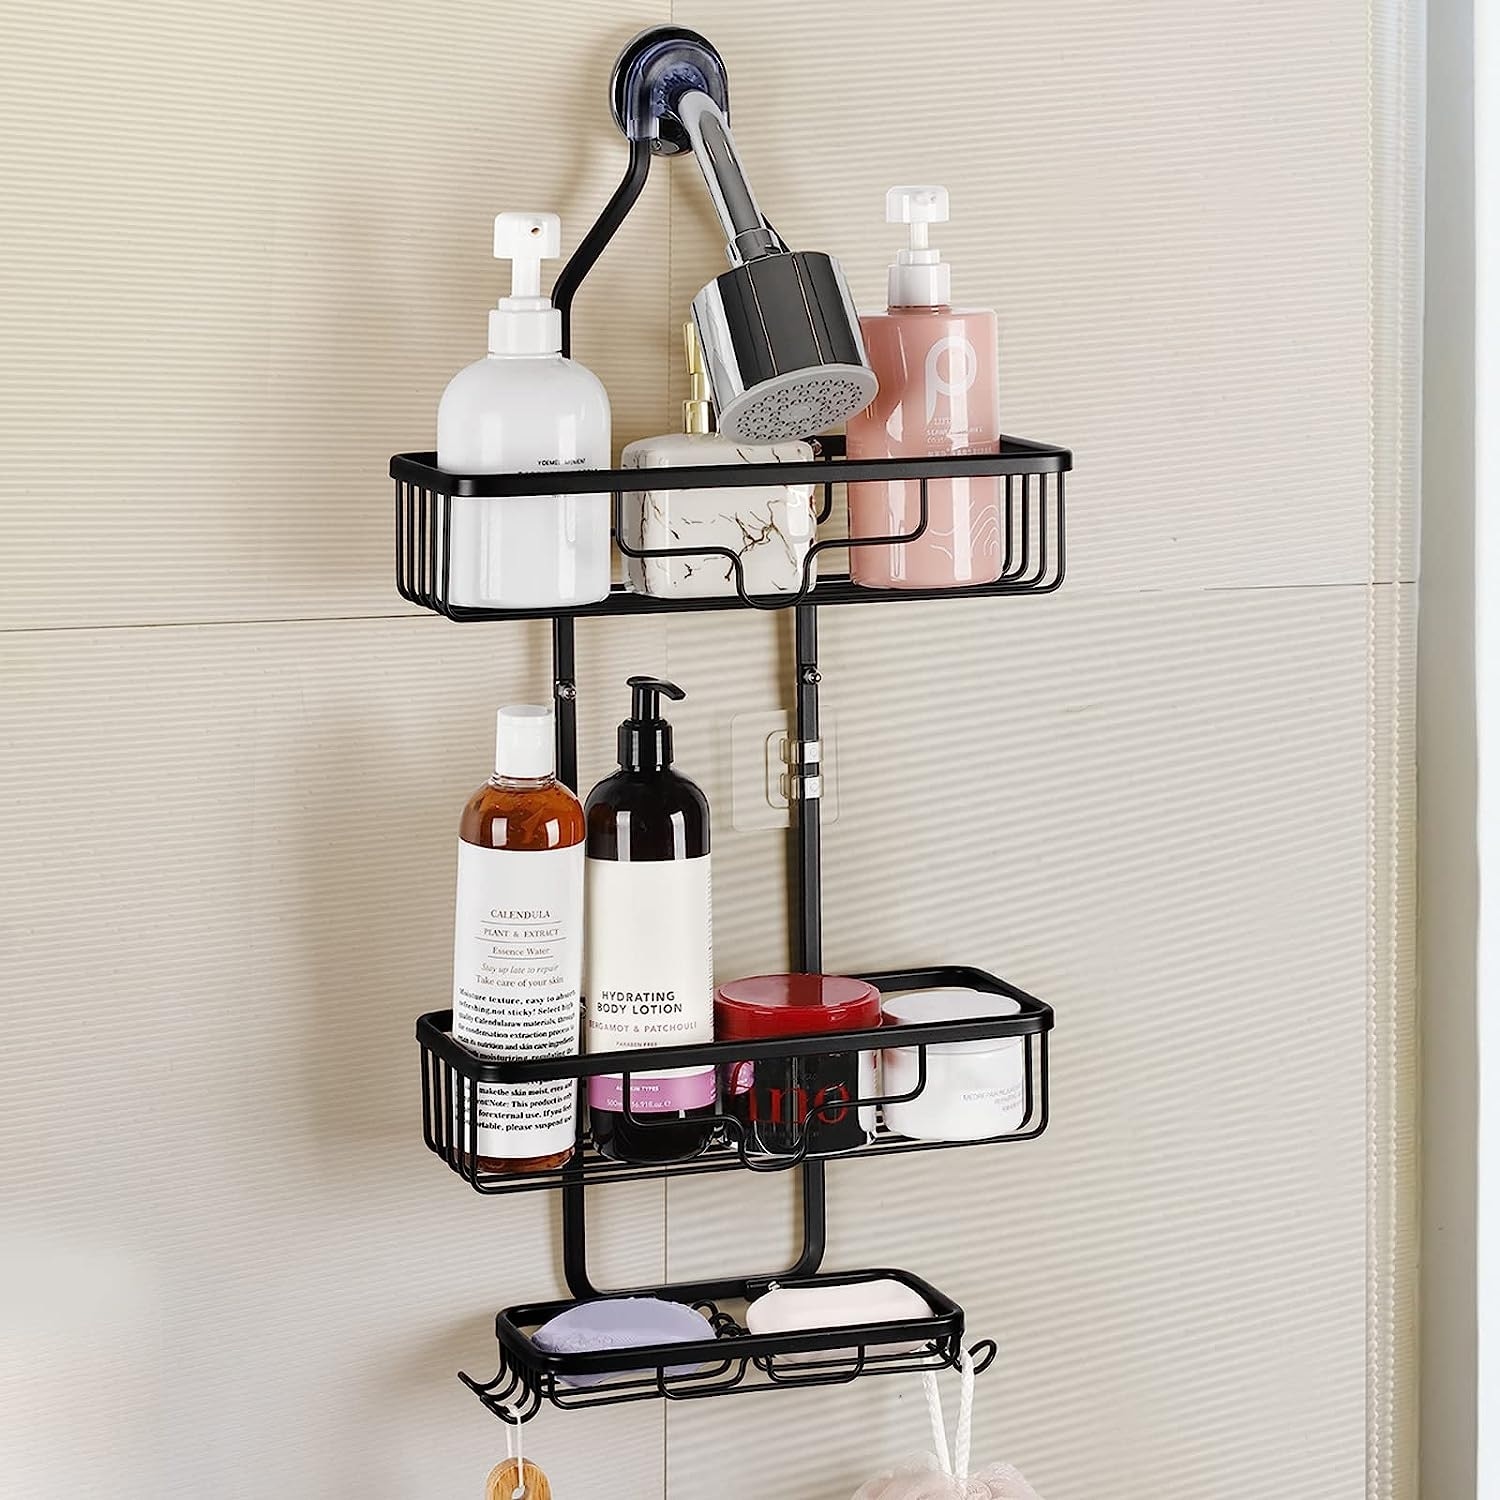 https://ak1.ostkcdn.com/images/products/is/images/direct/cb73e19498fb162a1fda34d41d027b17d75df6e4/3-Tier-Shower-Racks-with-Hooks-and-Shampoo-Soap-Razor-Holder.jpg